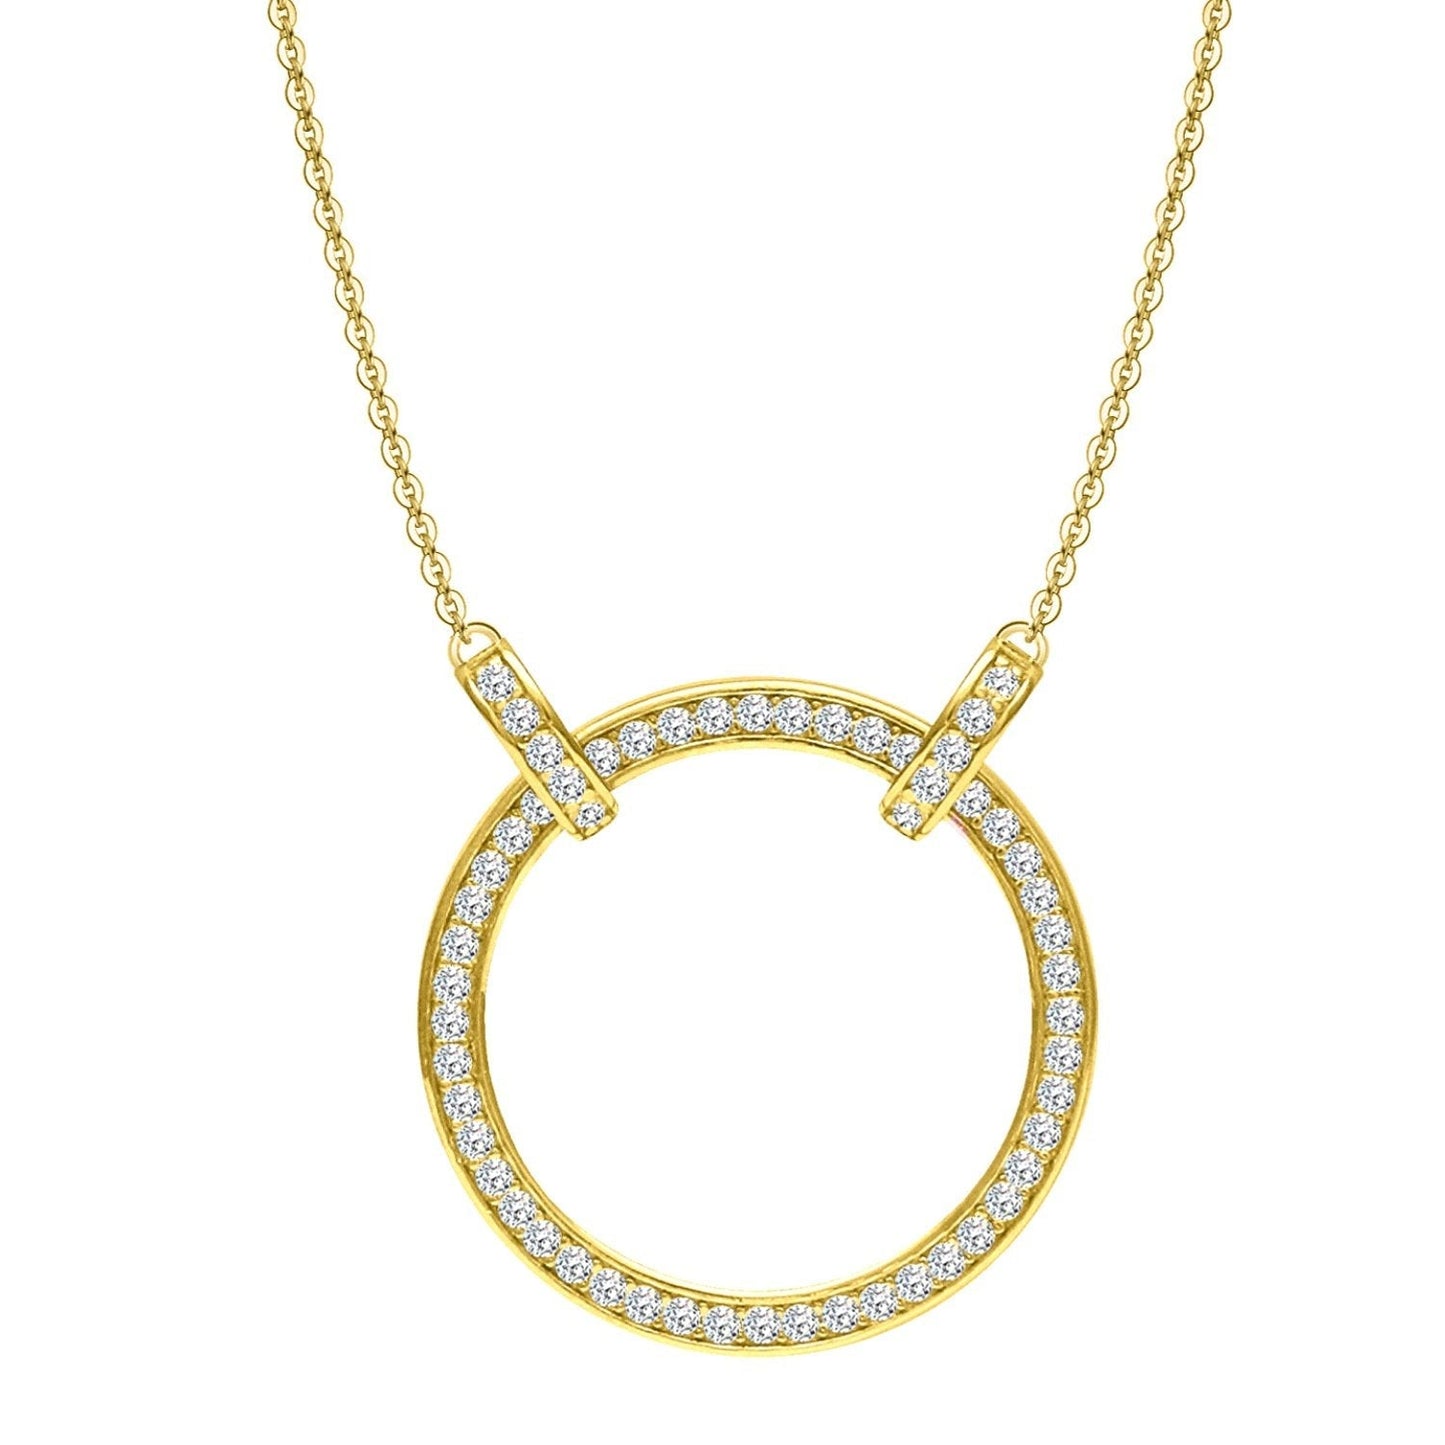 Circle of Life Celebrity Necklace in 92.5 Silver 18k Gold finish - Studded with Swiss Zirconia Unity, Wholeness and Completeness